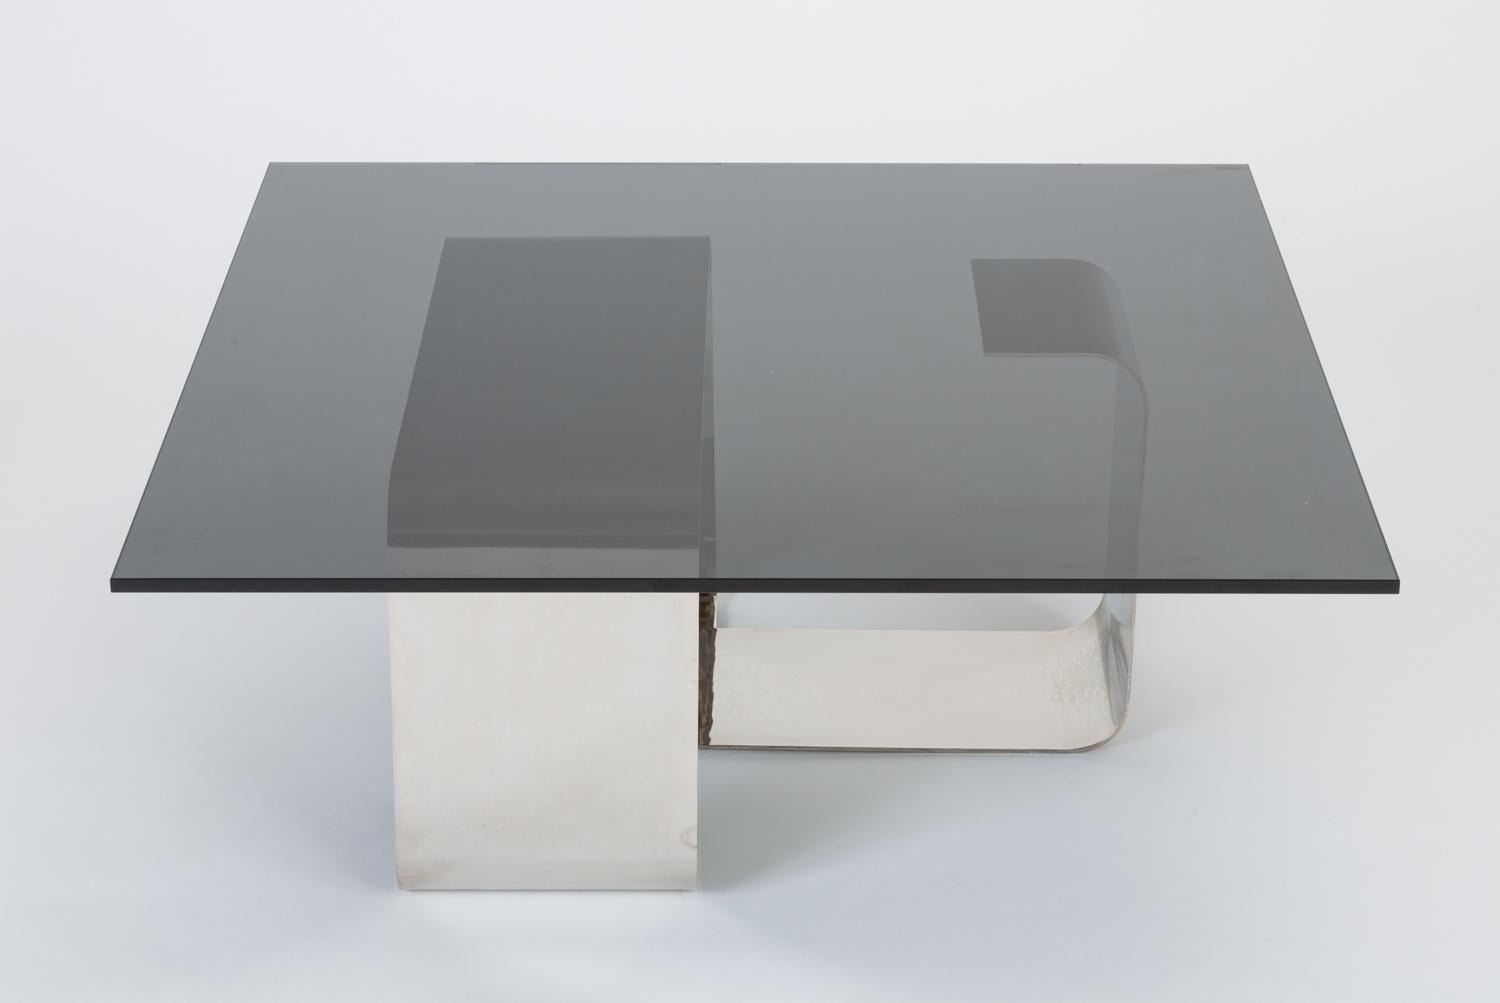 Polished Steel and Smoked Glass Coffee Table by François Monnet for Kappa 2